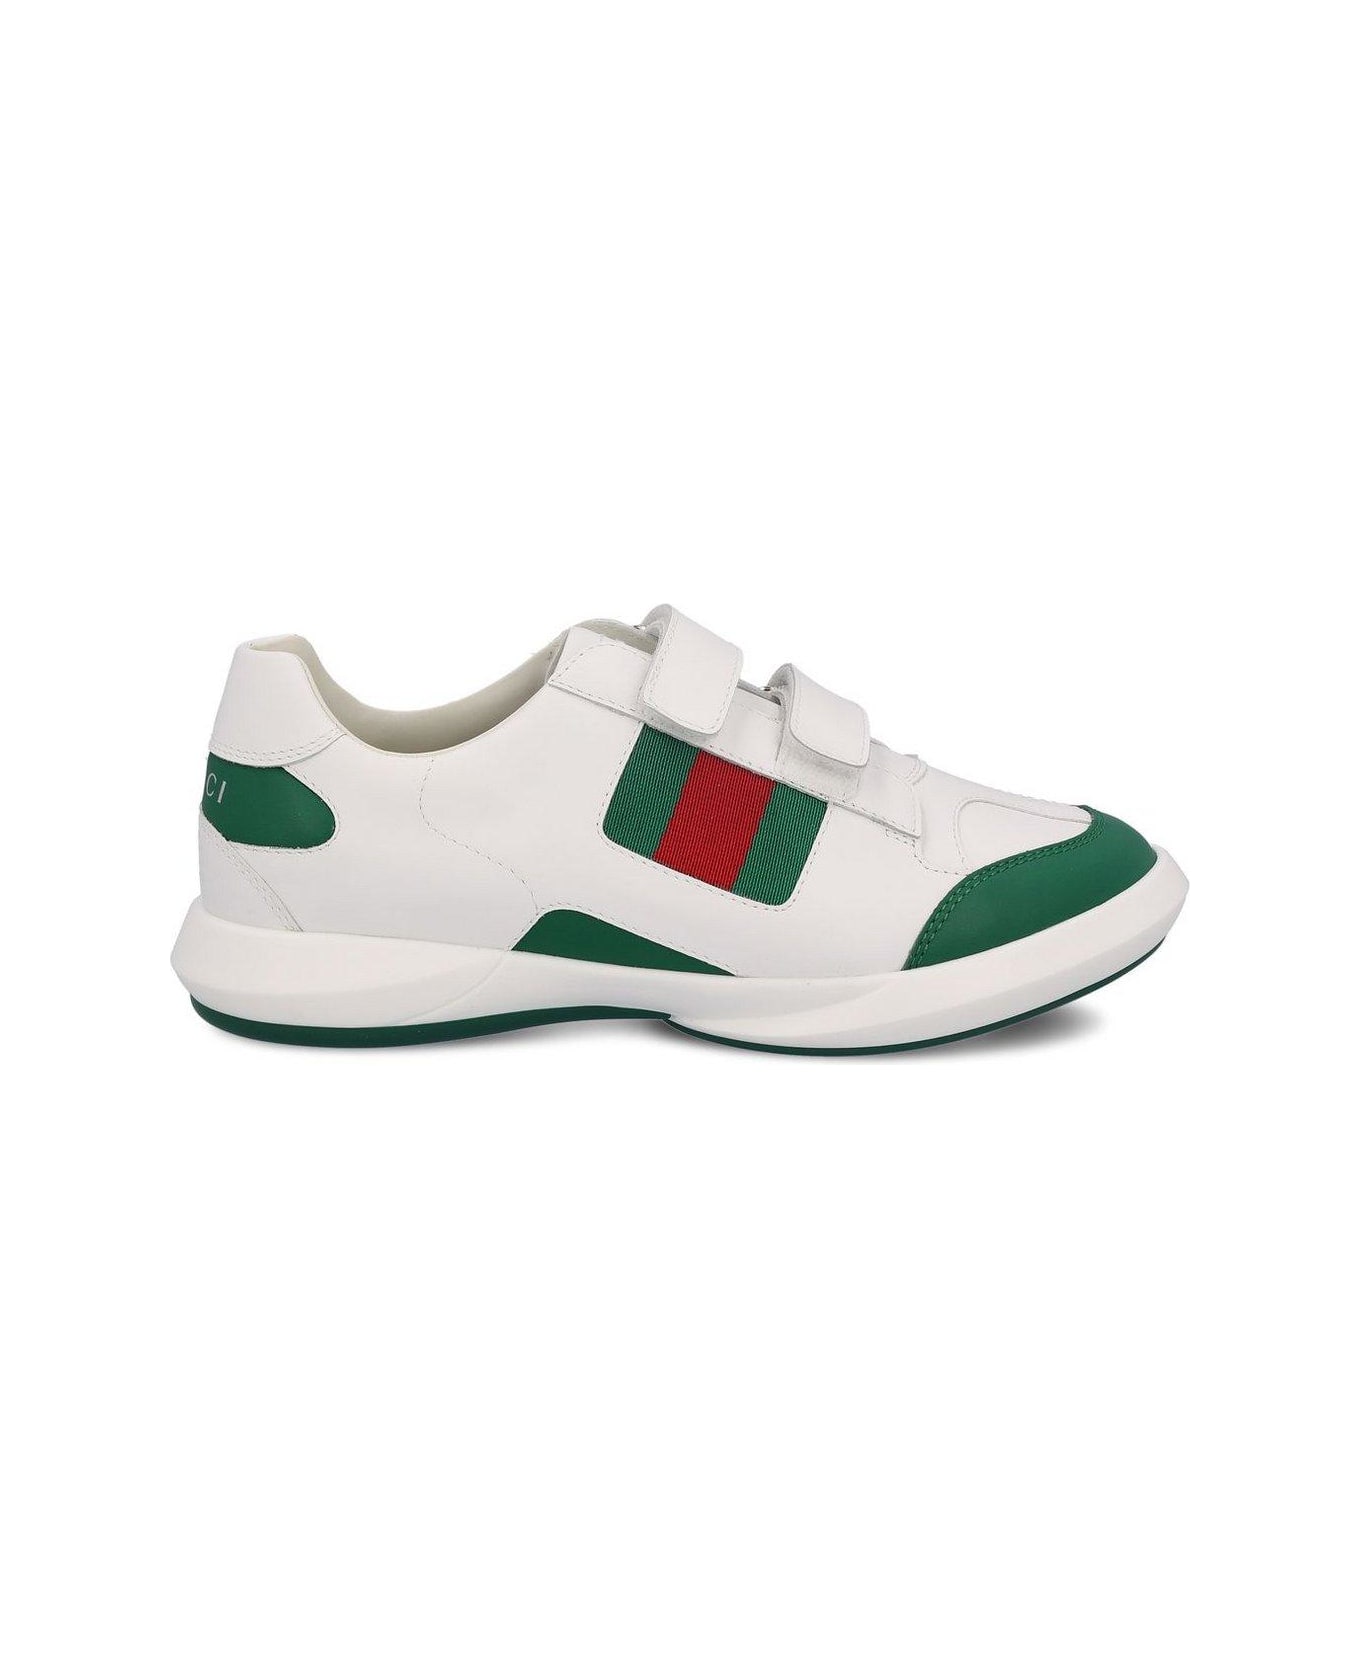 Gucci Logo Printed Round Toe Sneakers